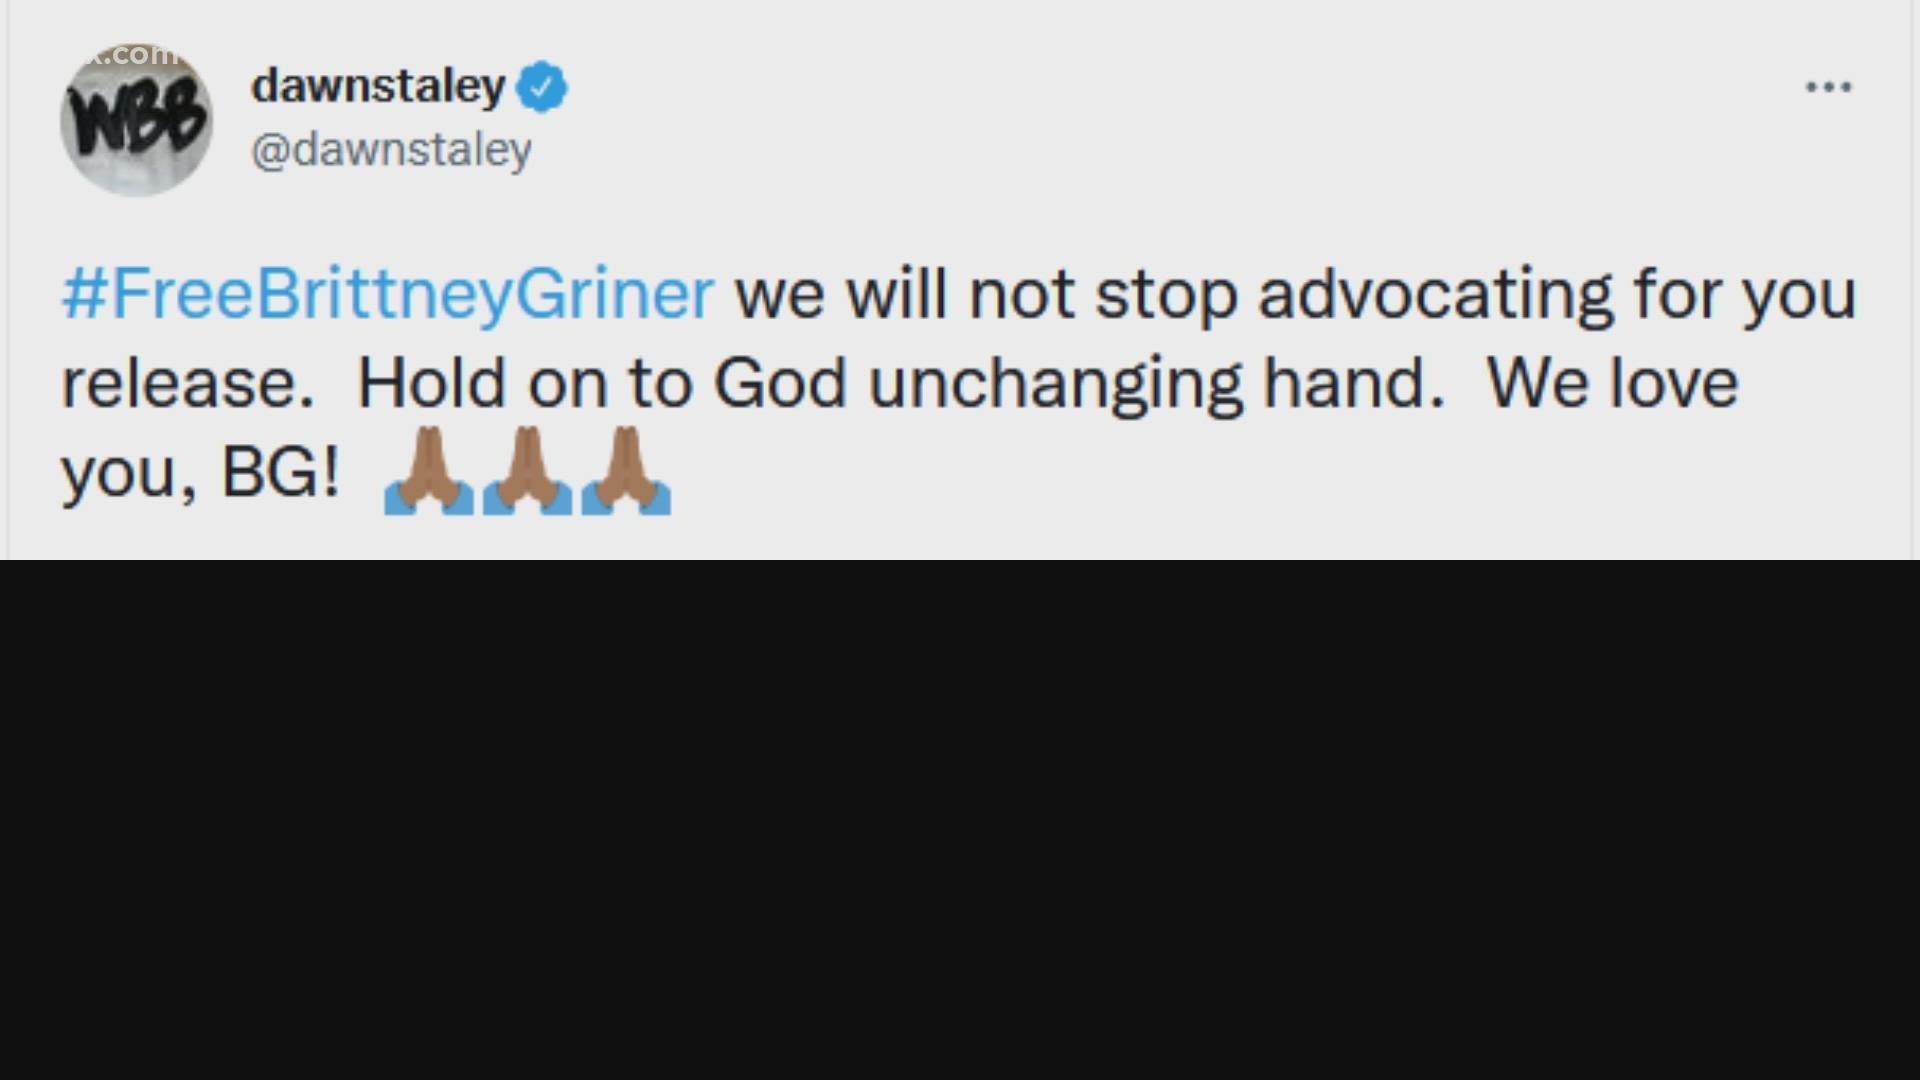 South Carolina Gamecocks coach Dawn Staley is responding to a decision by a Russian judge to sentence WNBA star Brittney Griner to 9 years in prison.